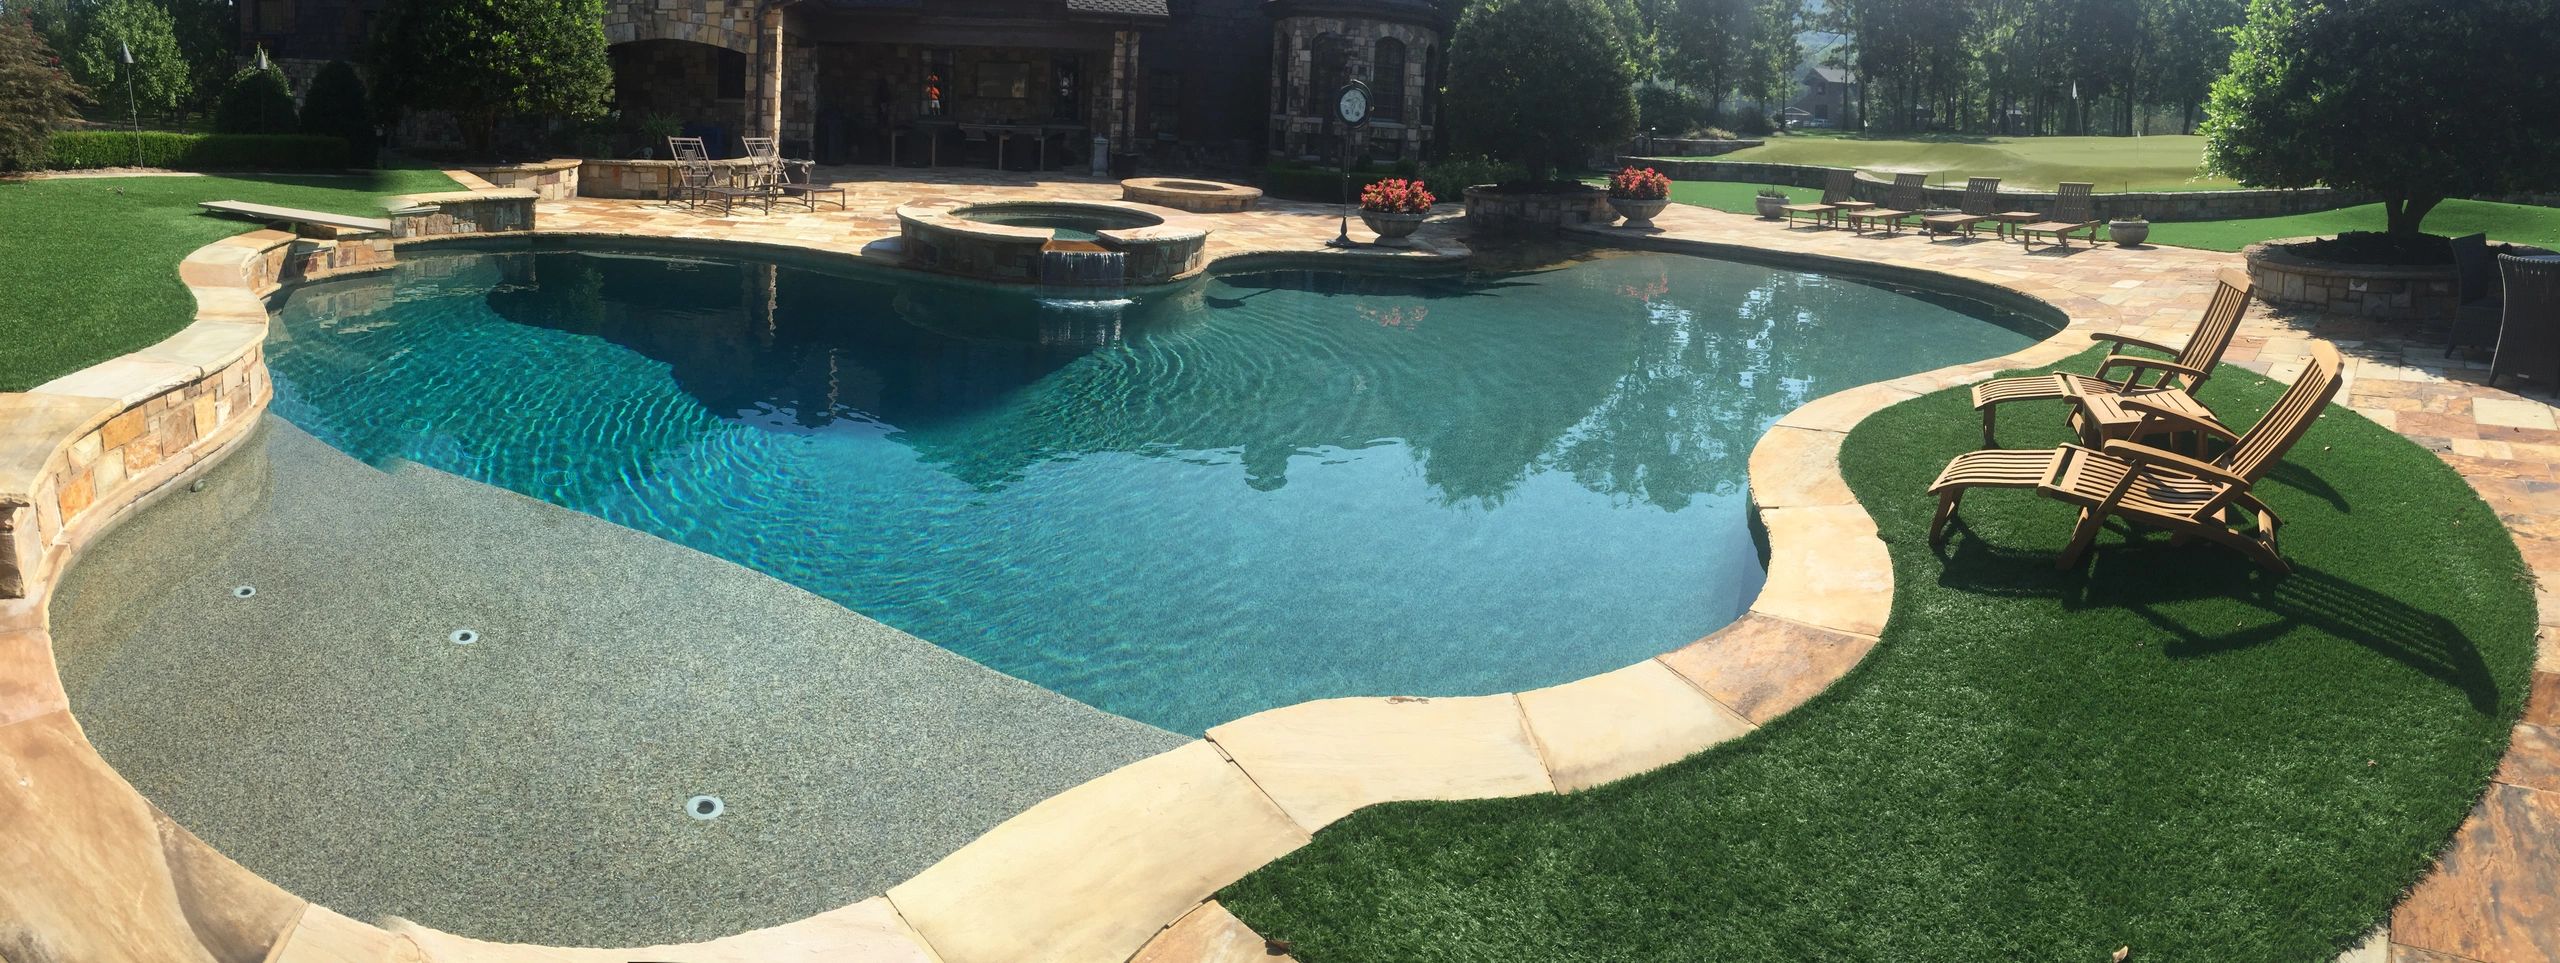 pool with tanning ledge water fall and hot tub